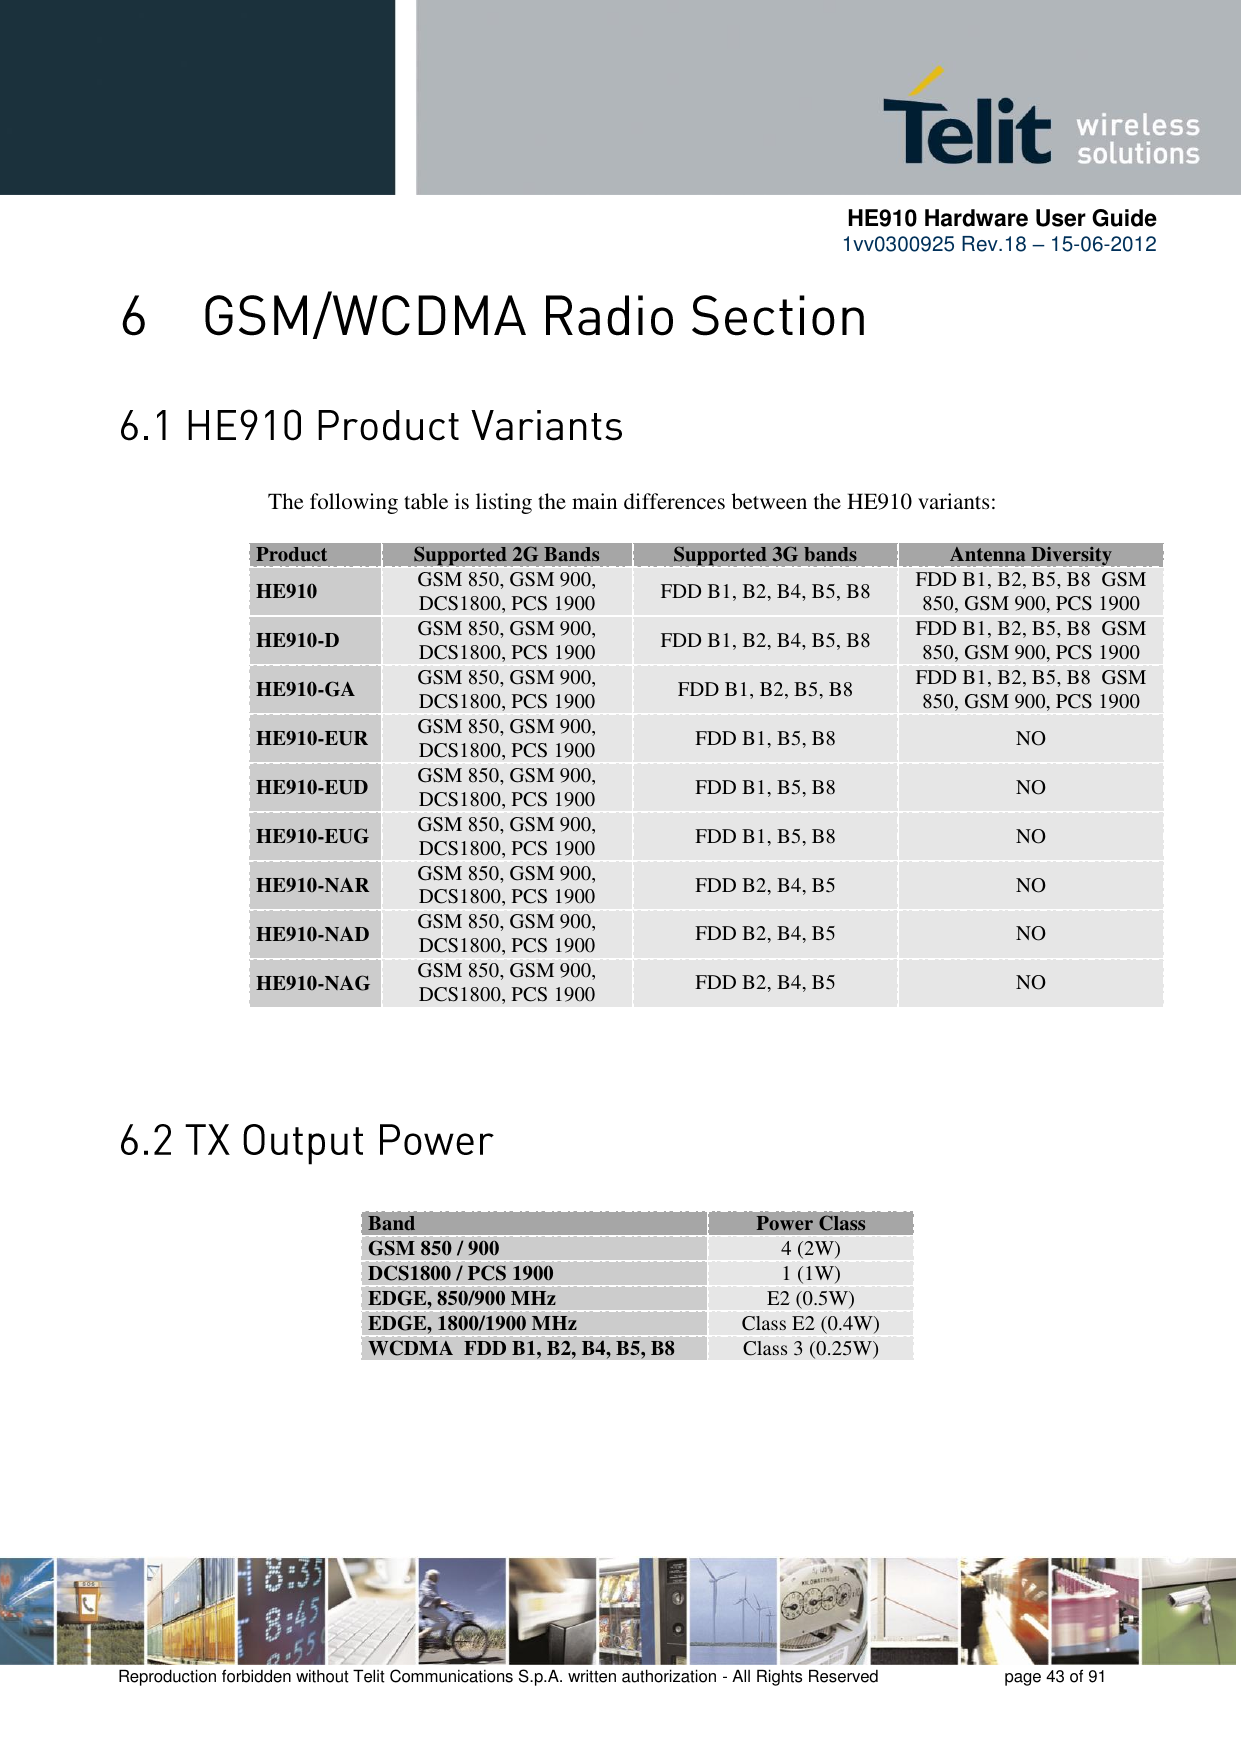      HE910 Hardware User Guide 1vv0300925 Rev.18 – 15-06-2012    Reproduction forbidden without Telit Communications S.p.A. written authorization - All Rights Reserved    page 43 of 91    The following table is listing the main differences between the HE910 variants:  Product Supported 2G Bands Supported 3G bands Antenna Diversity HE910 GSM 850, GSM 900, DCS1800, PCS 1900 FDD B1, B2, B4, B5, B8 FDD B1, B2, B5, B8  GSM 850, GSM 900, PCS 1900 HE910-D GSM 850, GSM 900, DCS1800, PCS 1900 FDD B1, B2, B4, B5, B8 FDD B1, B2, B5, B8  GSM 850, GSM 900, PCS 1900 HE910-GA GSM 850, GSM 900, DCS1800, PCS 1900 FDD B1, B2, B5, B8 FDD B1, B2, B5, B8  GSM 850, GSM 900, PCS 1900 HE910-EUR GSM 850, GSM 900, DCS1800, PCS 1900 FDD B1, B5, B8 NO HE910-EUD GSM 850, GSM 900, DCS1800, PCS 1900 FDD B1, B5, B8 NO HE910-EUG GSM 850, GSM 900, DCS1800, PCS 1900 FDD B1, B5, B8 NO HE910-NAR GSM 850, GSM 900, DCS1800, PCS 1900 FDD B2, B4, B5 NO HE910-NAD GSM 850, GSM 900, DCS1800, PCS 1900 FDD B2, B4, B5 NO HE910-NAG GSM 850, GSM 900, DCS1800, PCS 1900 FDD B2, B4, B5 NO                  Band Power Class GSM 850 / 900 4 (2W) DCS1800 / PCS 1900 1 (1W) EDGE, 850/900 MHz E2 (0.5W) EDGE, 1800/1900 MHz Class E2 (0.4W) WCDMA  FDD B1, B2, B4, B5, B8 Class 3 (0.25W) 